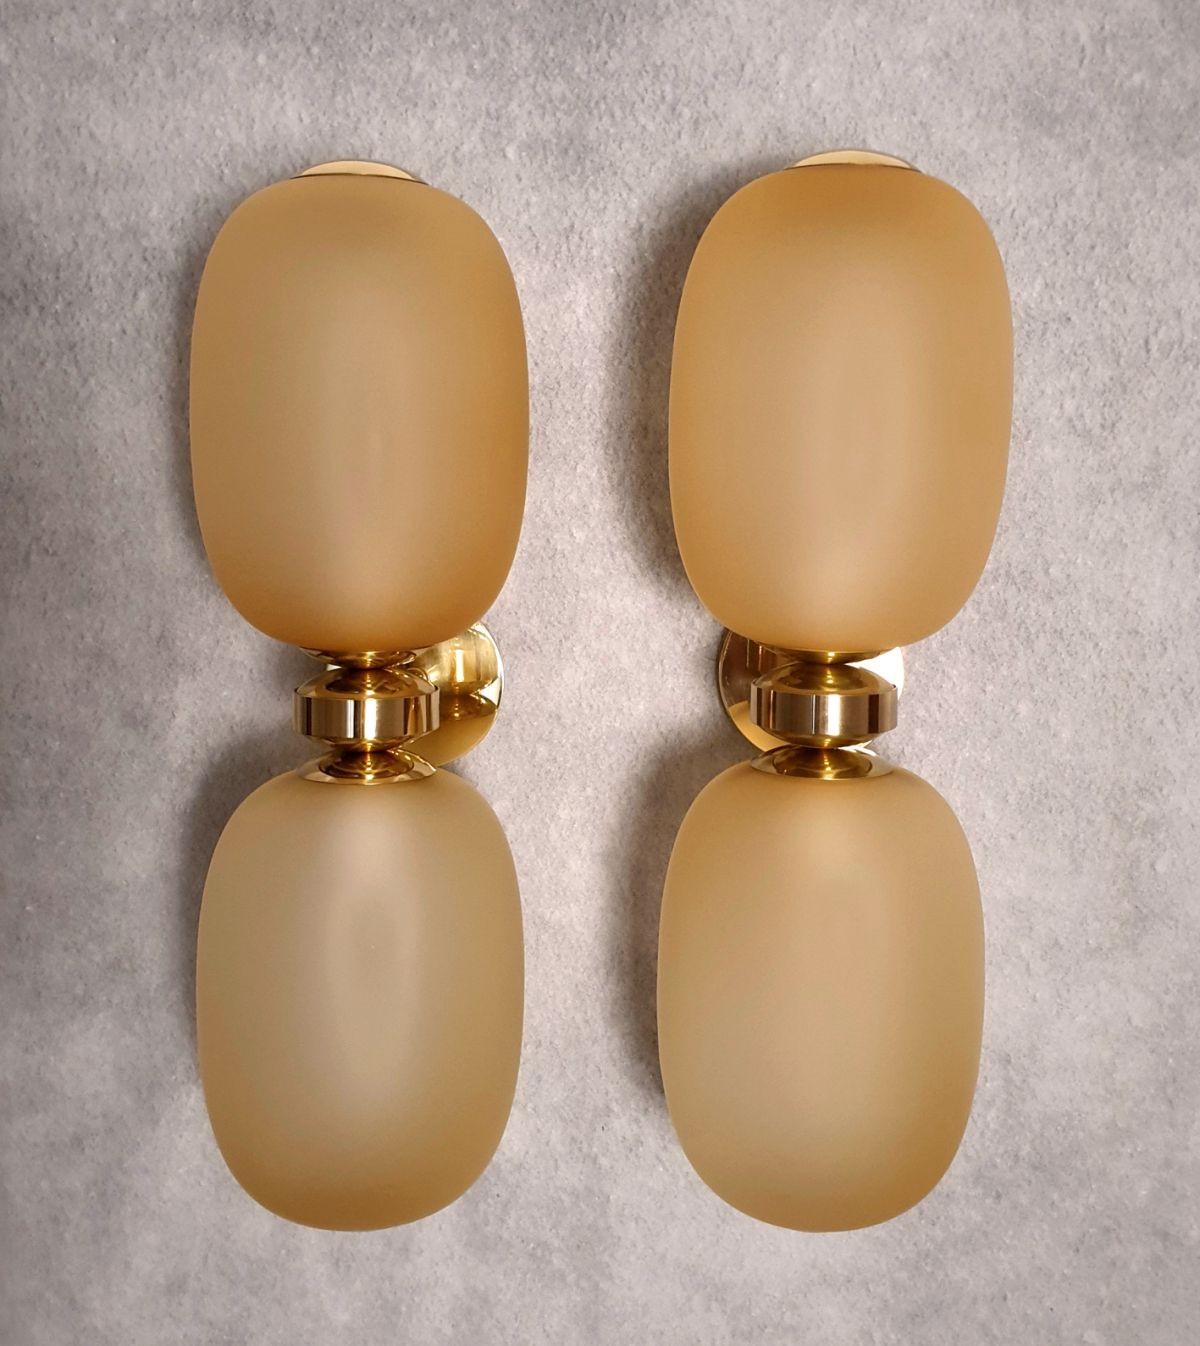 Pair of Mid-Century-Modern Murano glass and brass sconces, Barovier & Toso style, Italy, 1980s.
Two pairs of sconces available. Priced and sold by pair.
Each sconce has a two Murano glass globes, up and down.
The blown glasses have an oval shape, in